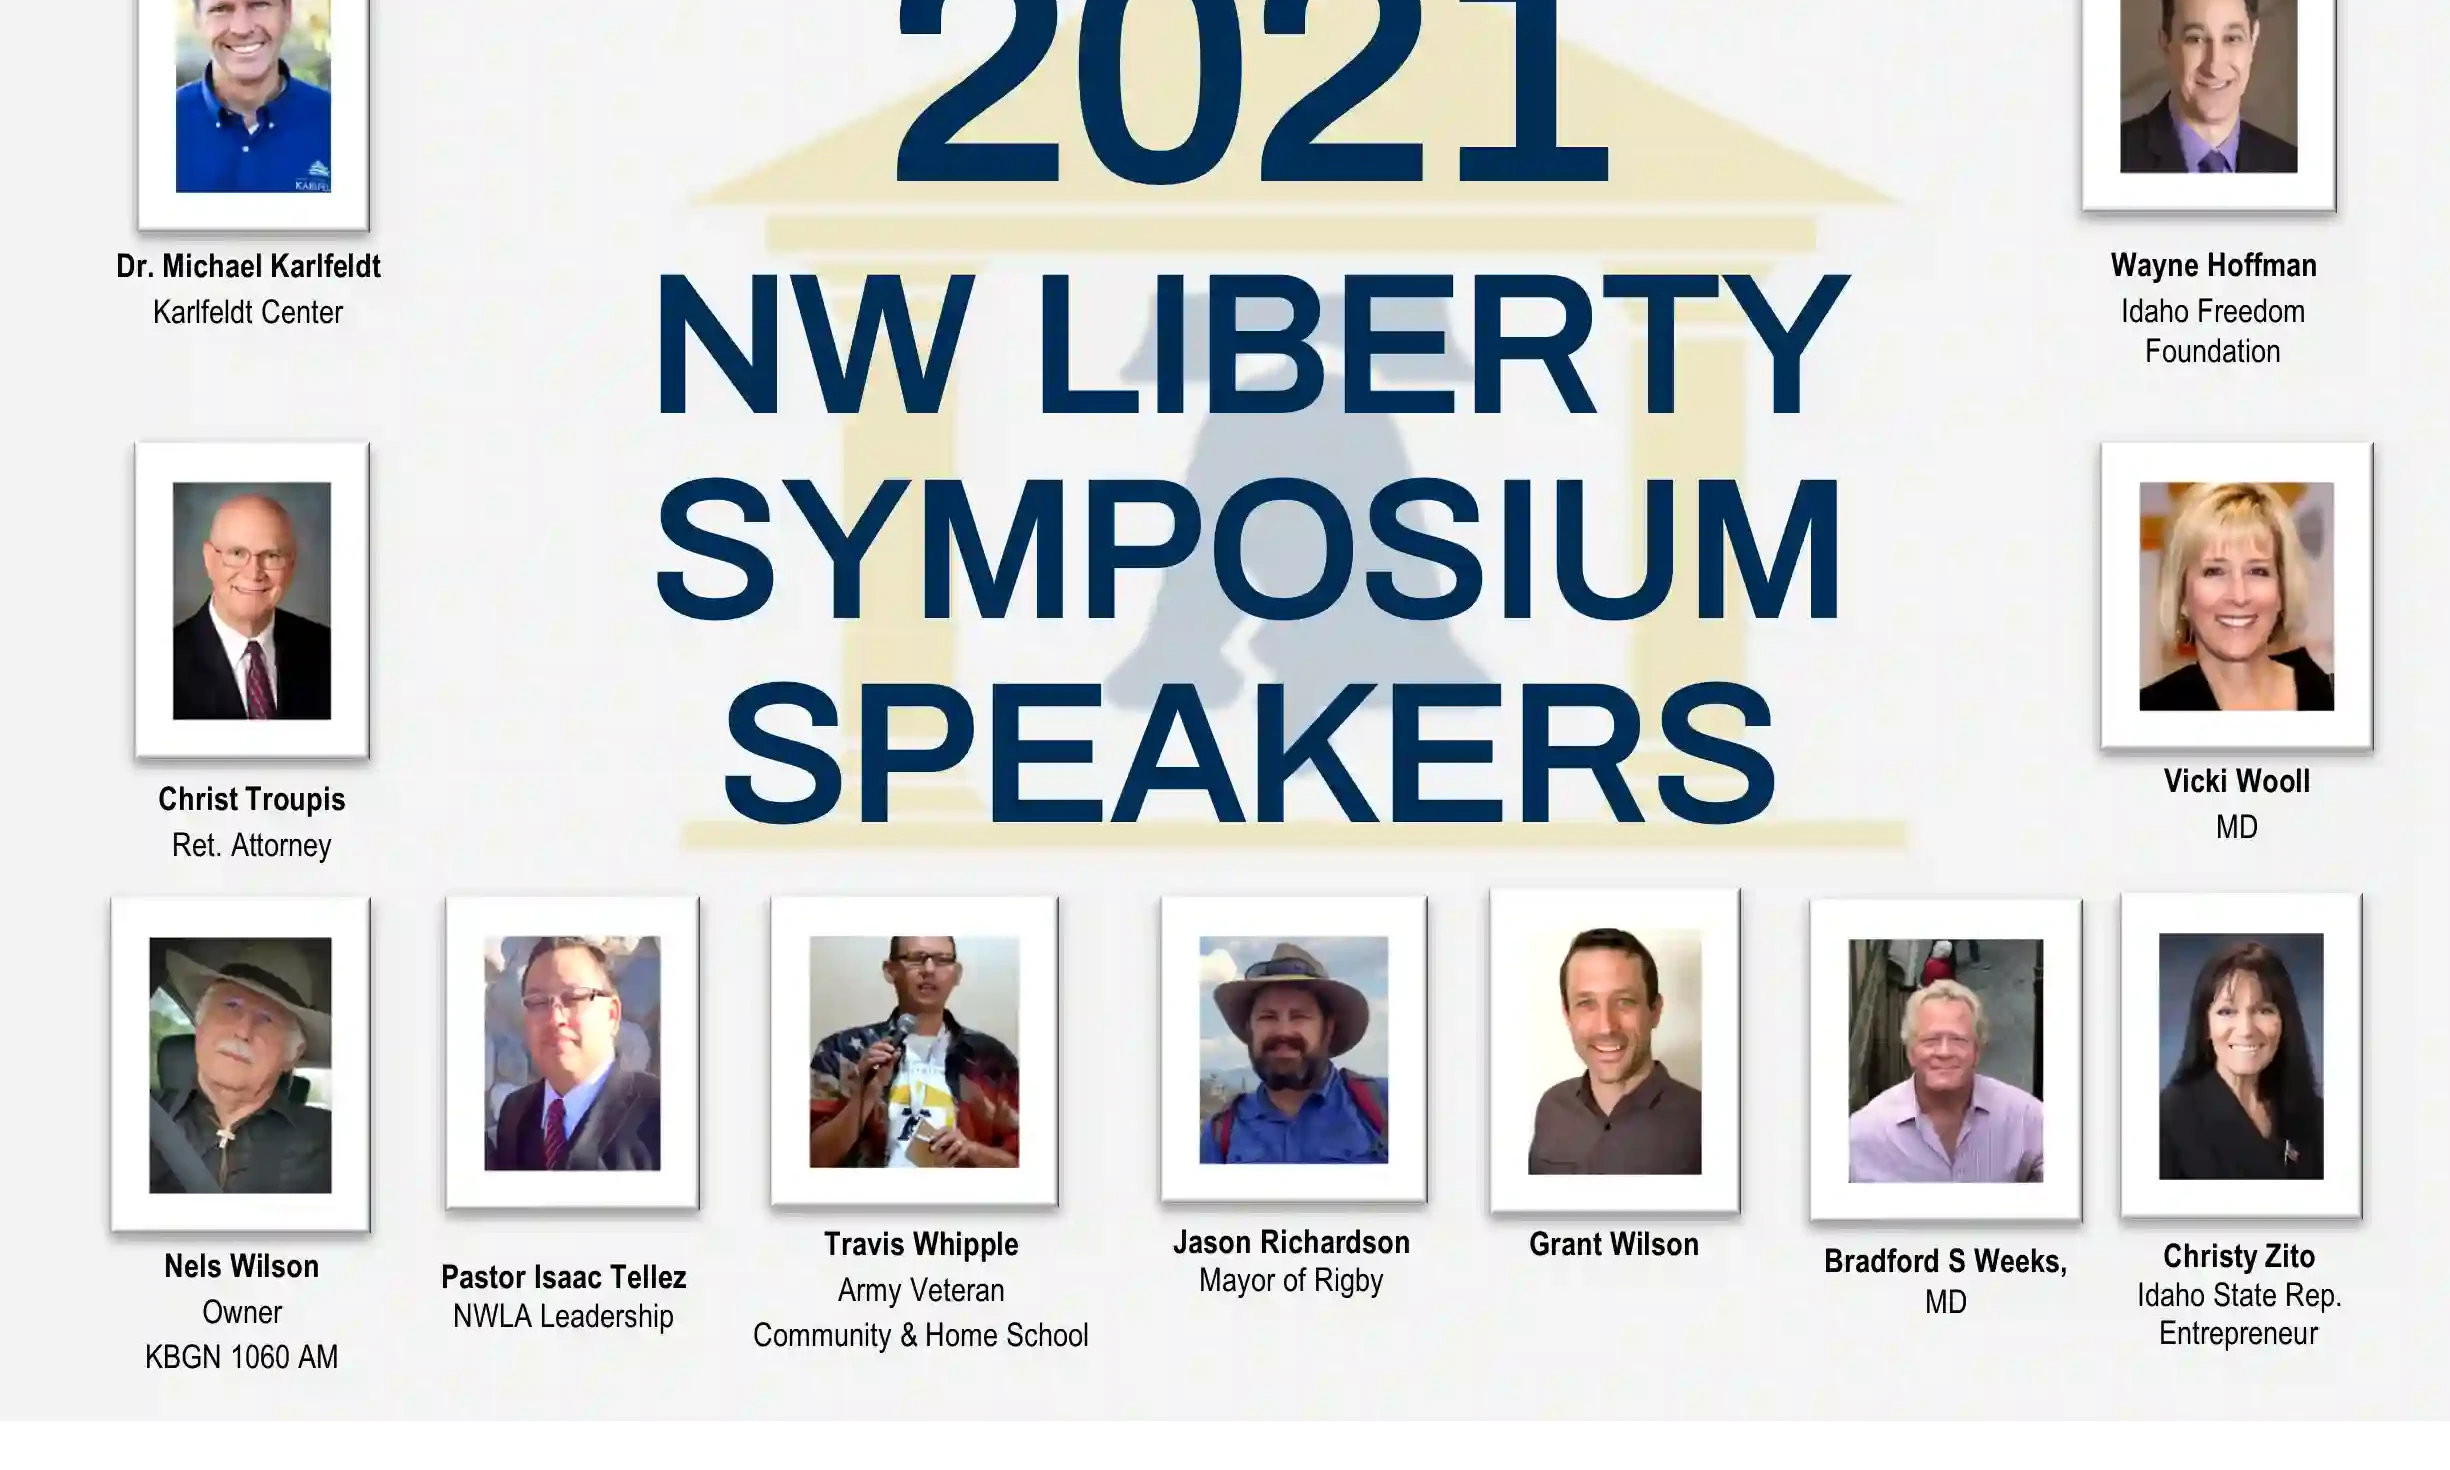 Roster of Speakers at the 2021 NW Liberty Symposium